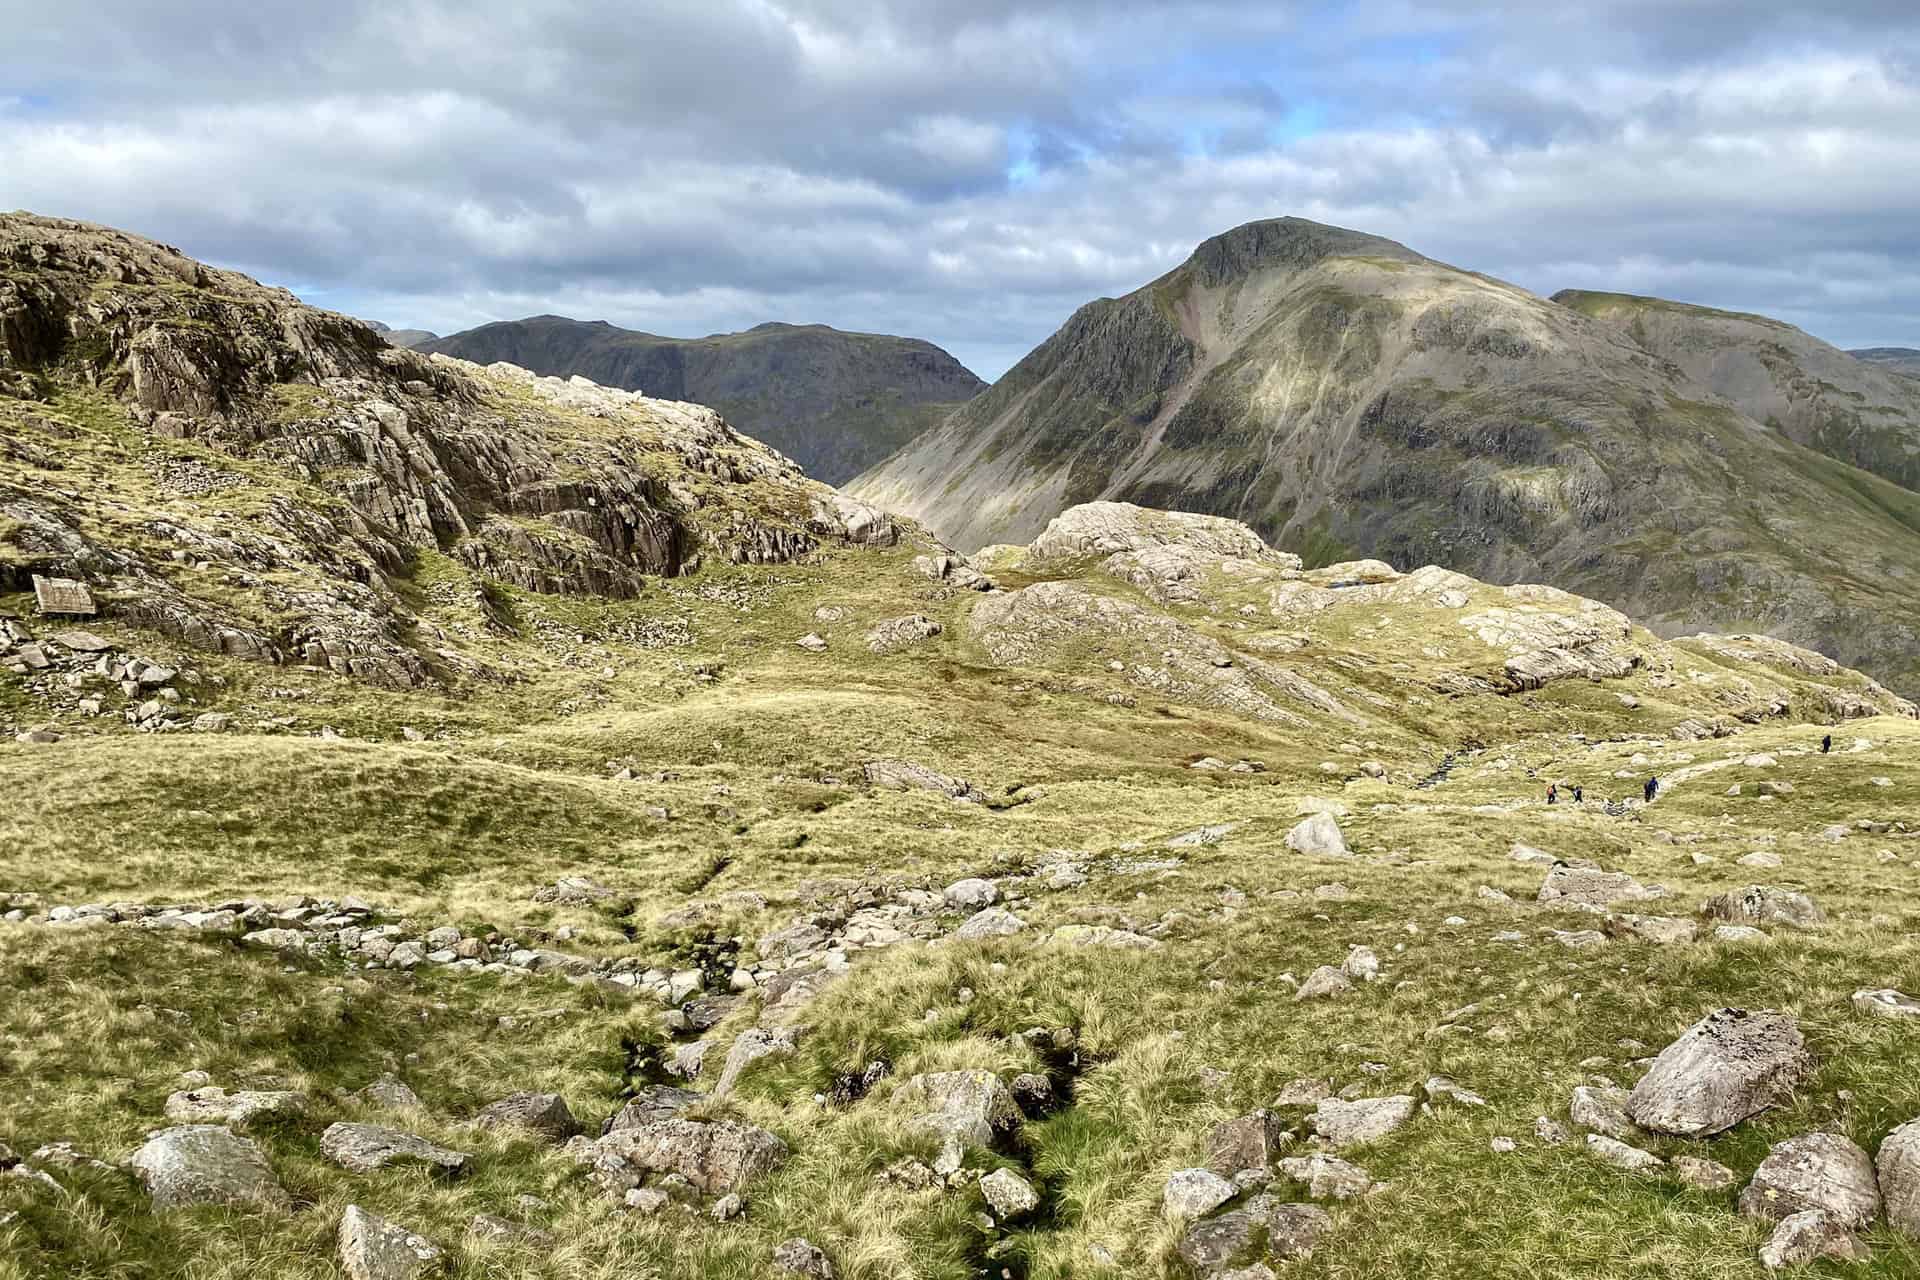 The view of Great Gable from the Scafell Pike Corridor Route.